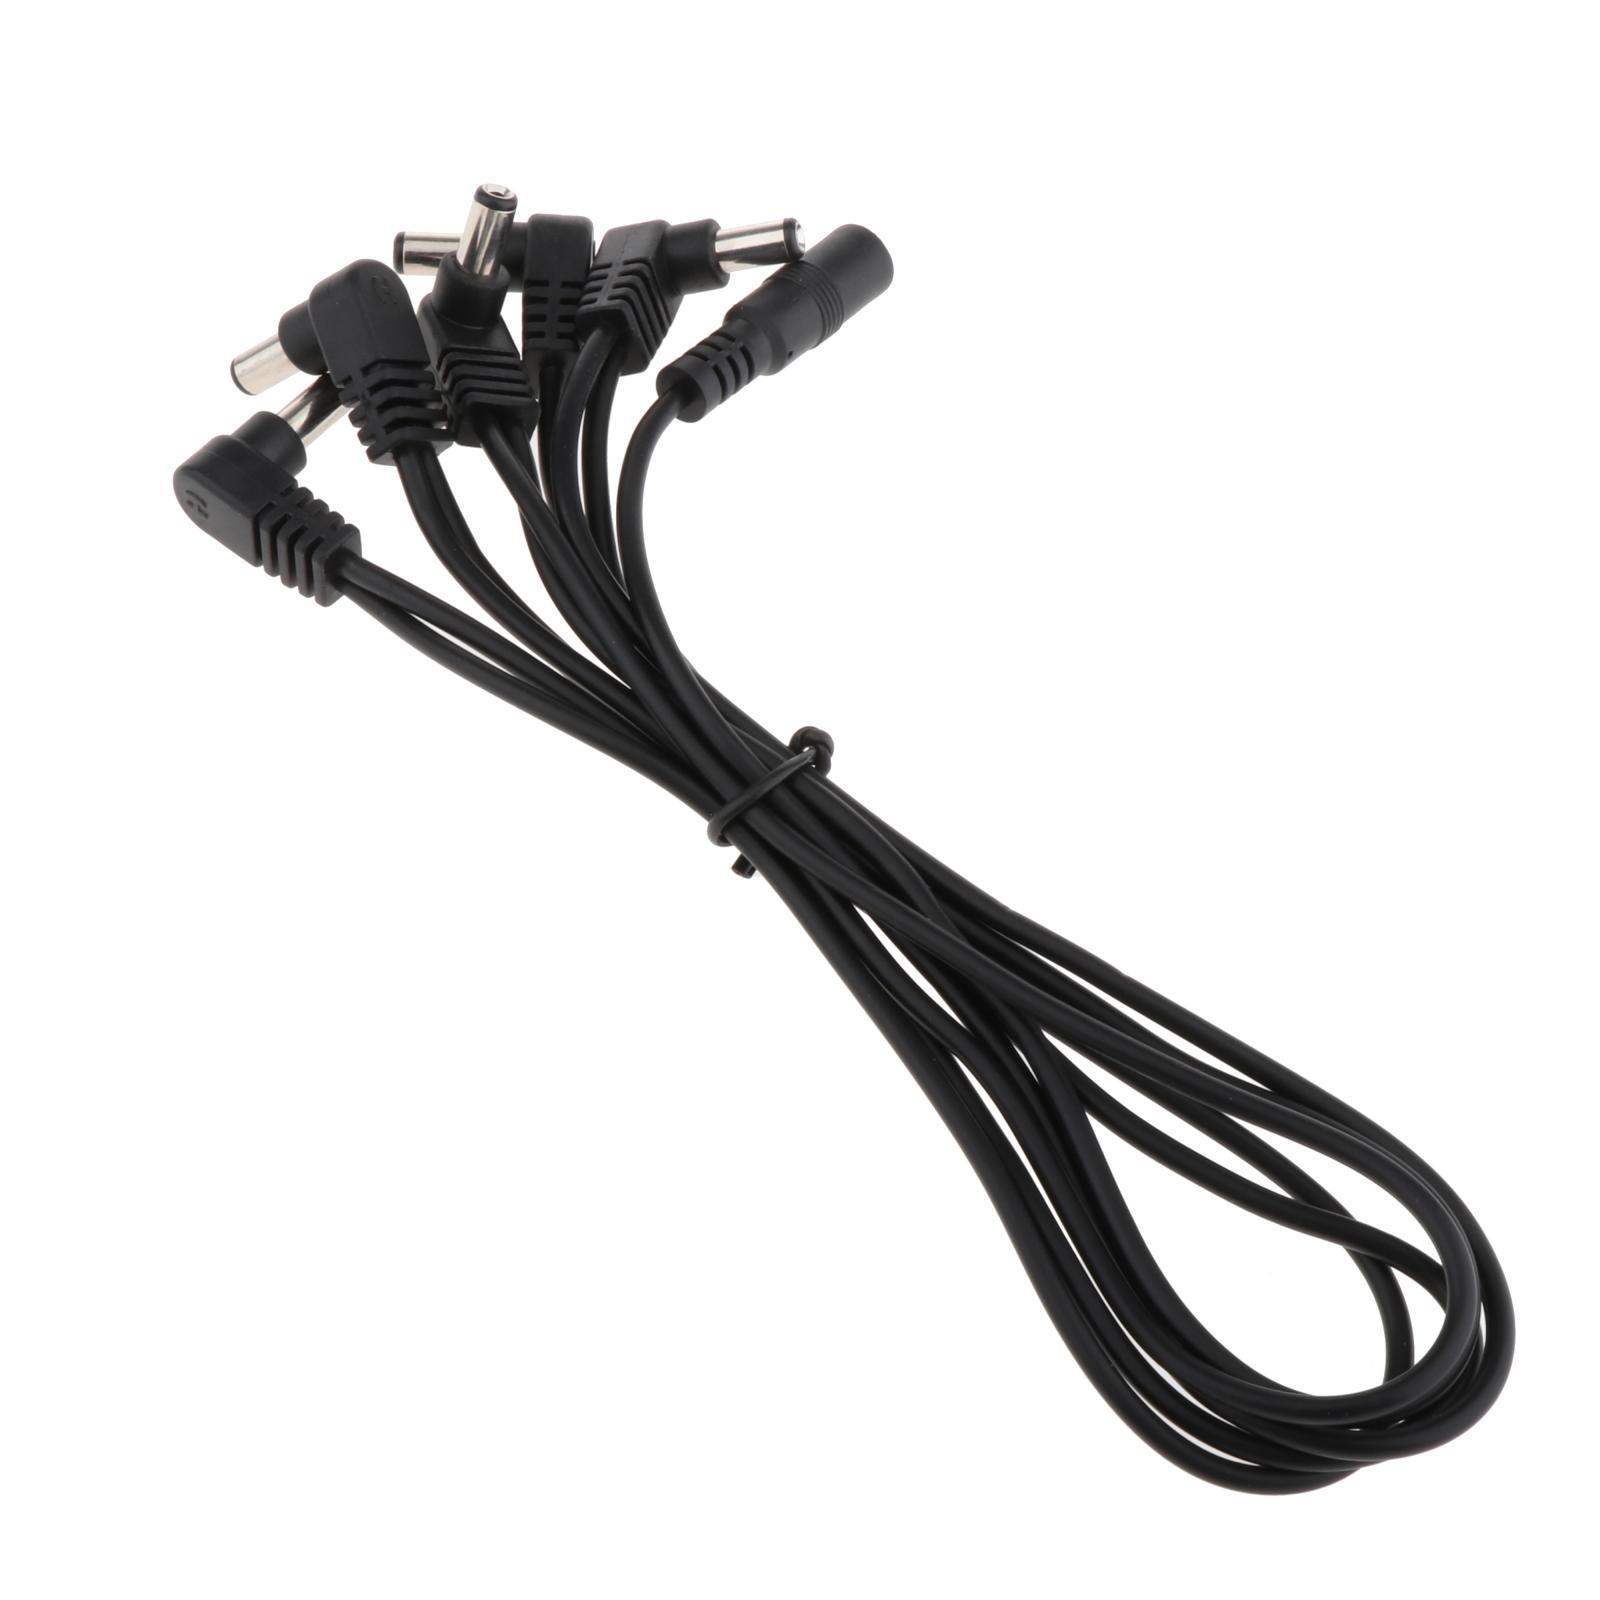 Guitar Effector Power Supply Adapter US Plug With 1 to  Splitter Cable